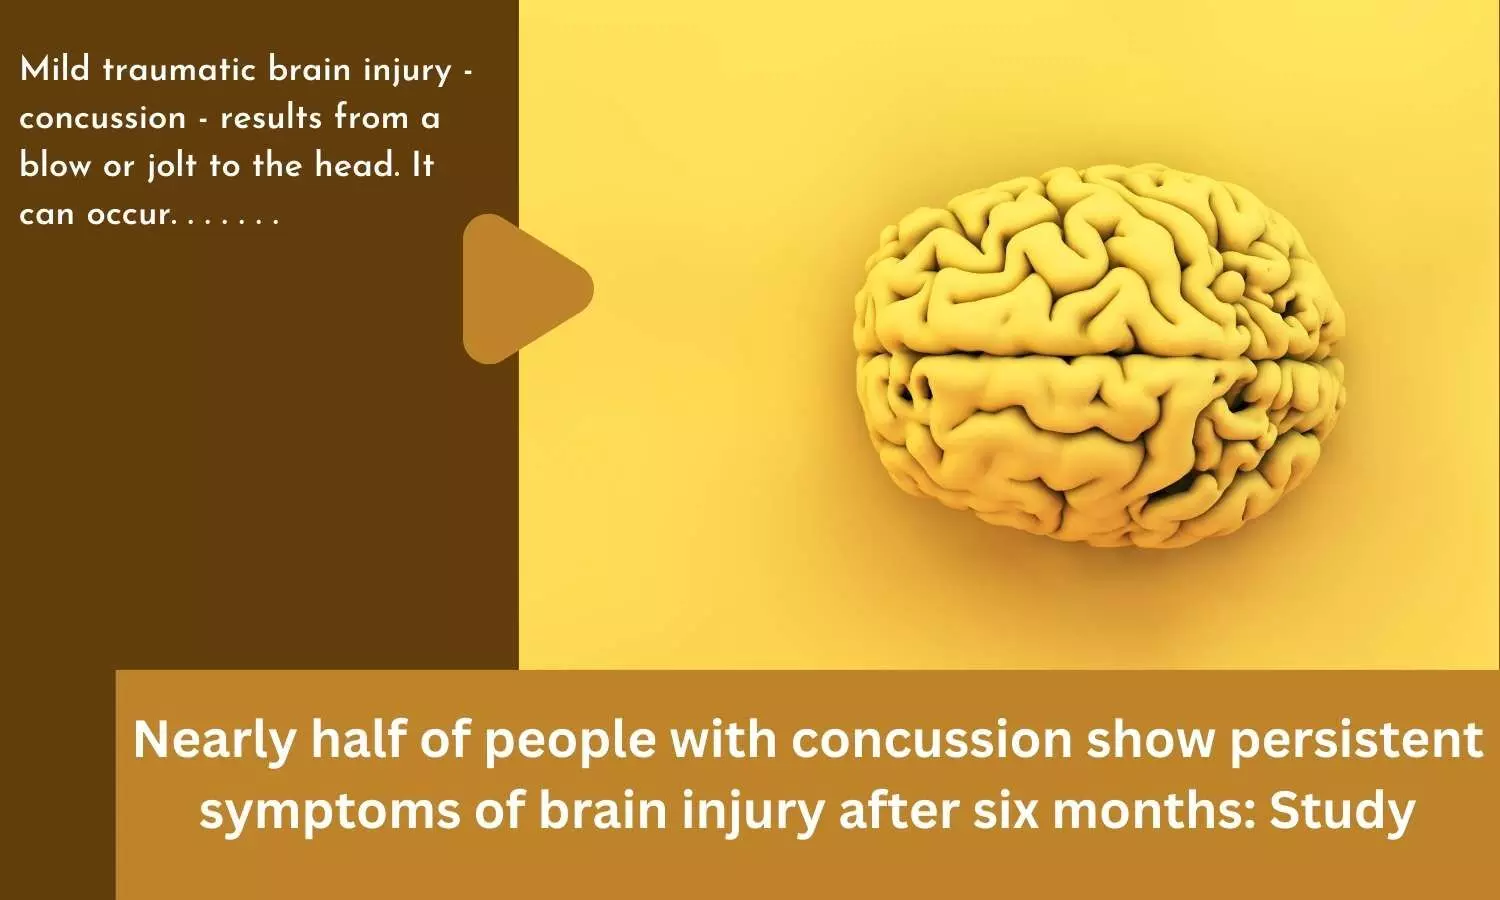 Nearly half of people with concussion show persistent symptoms of brain injury after six months: Study